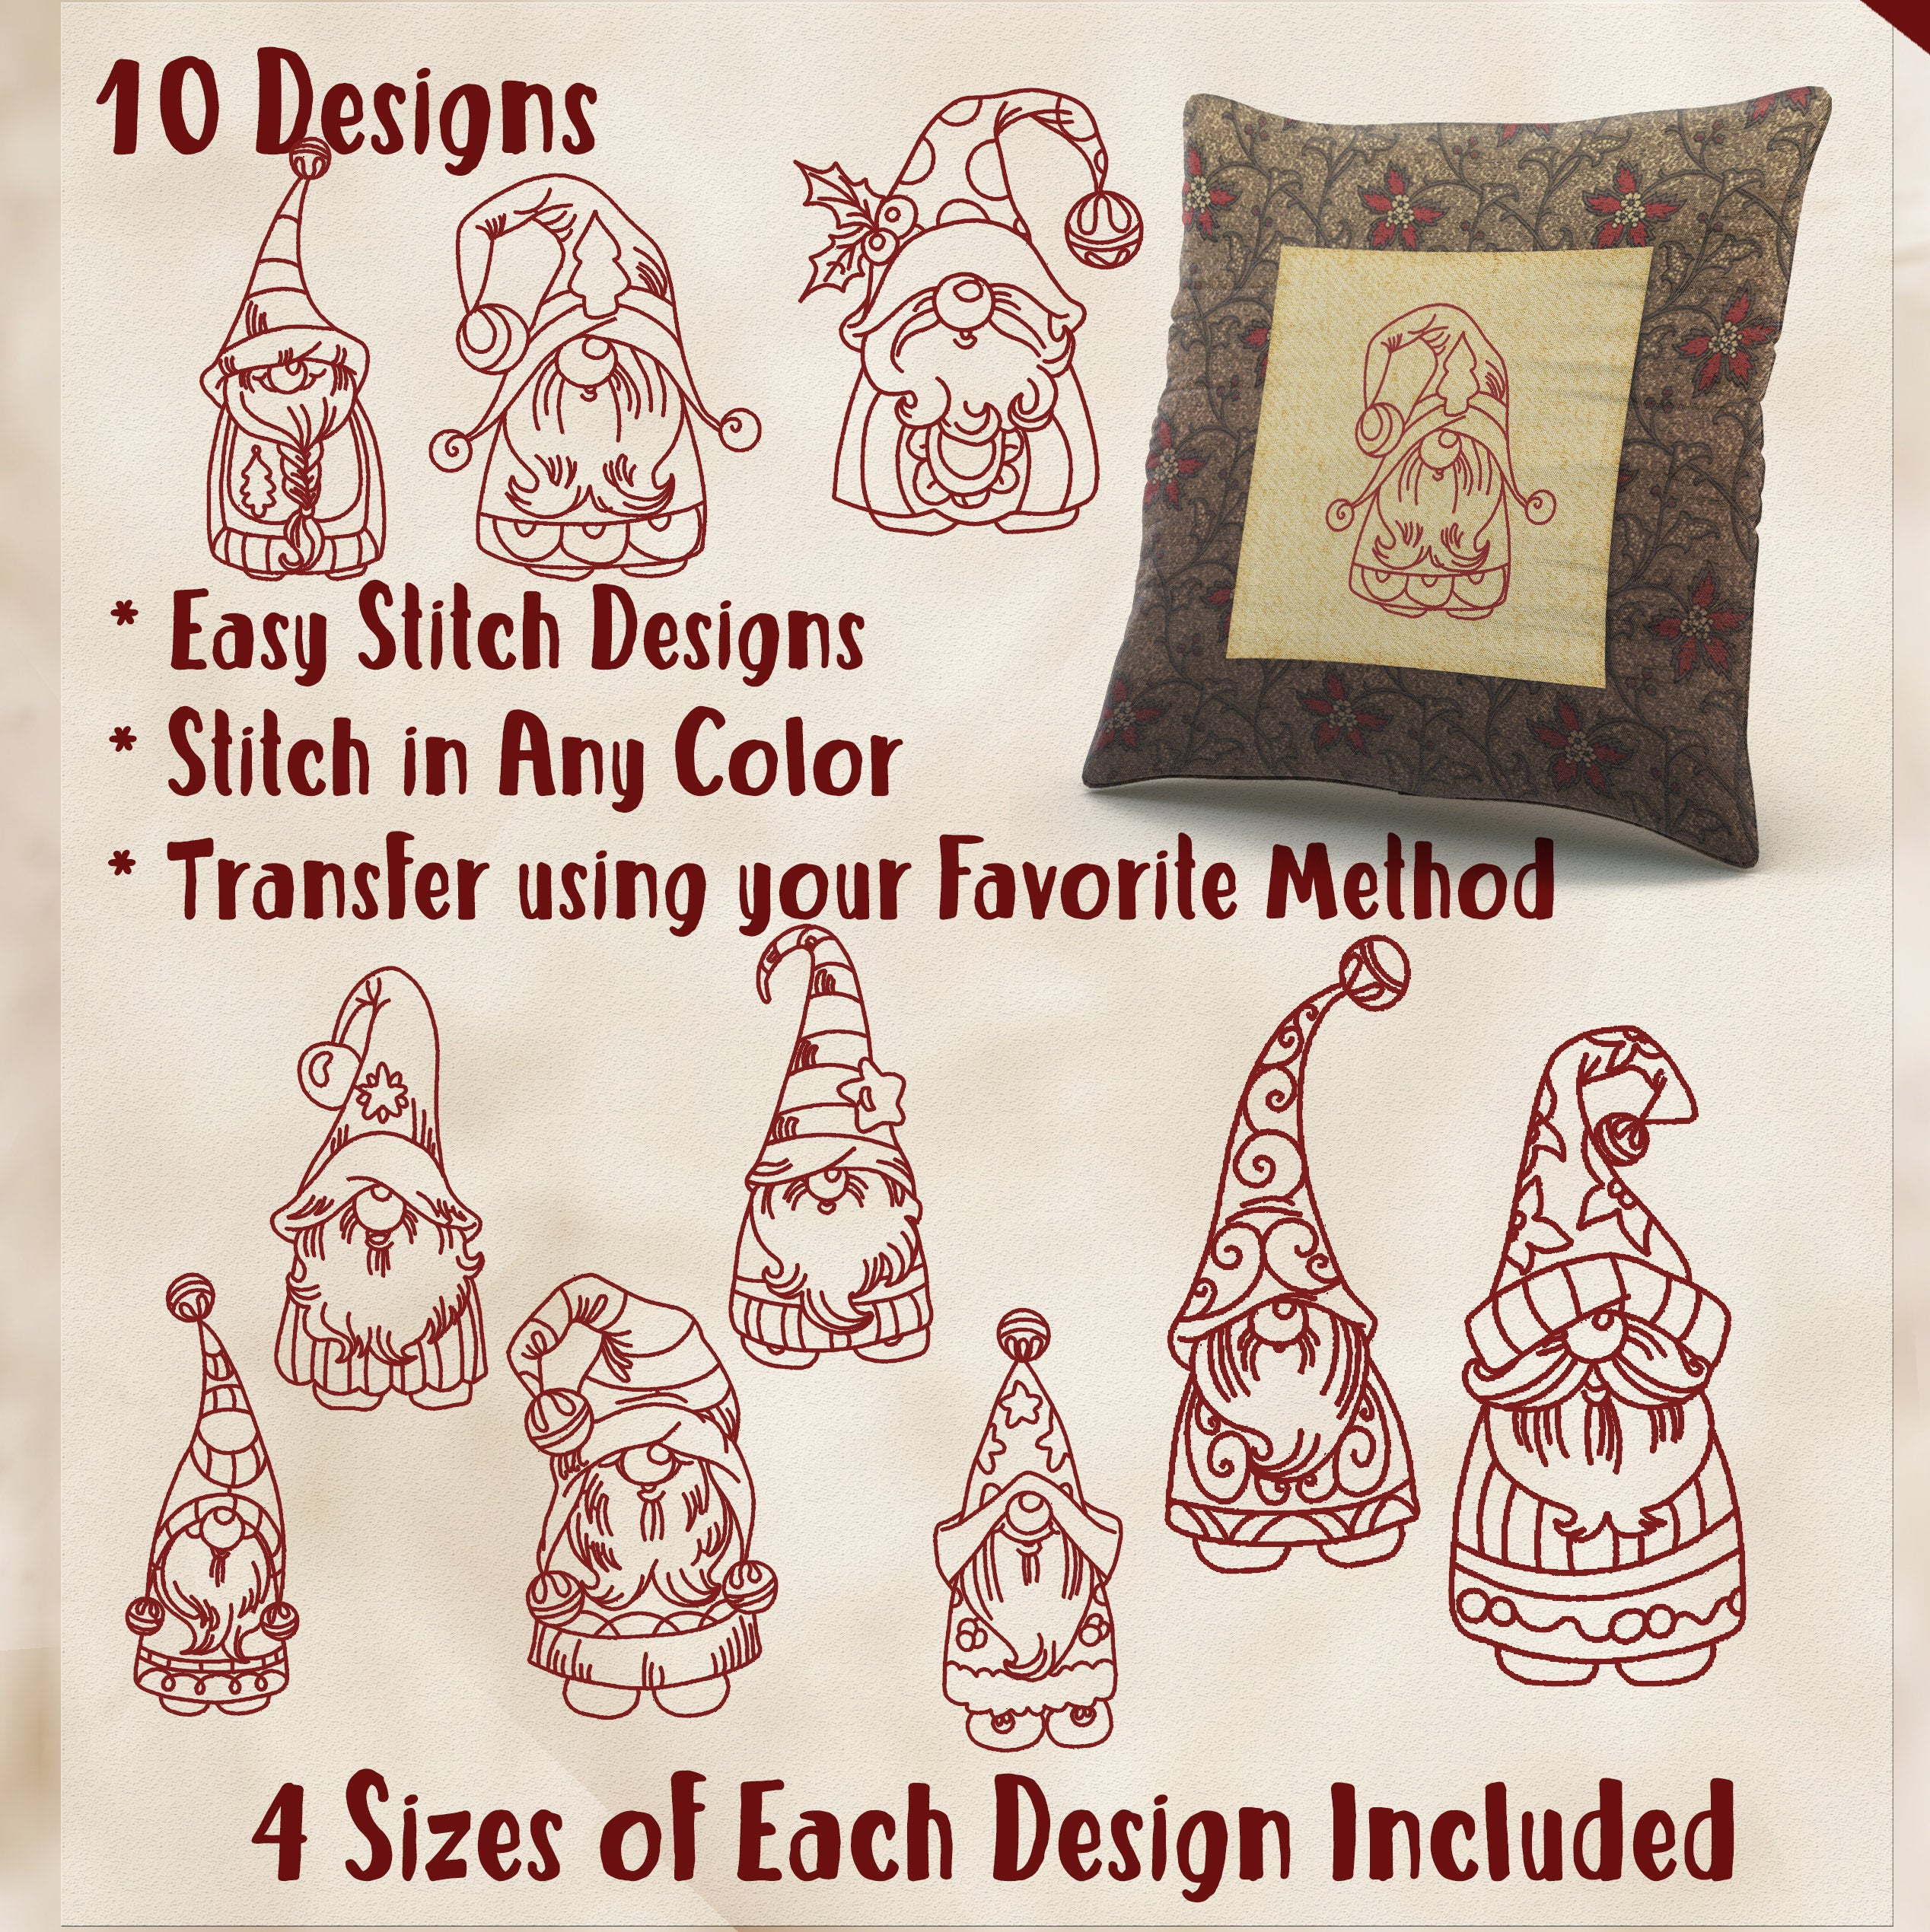 Christmas Hand Embroidery Patterns Sale Hand Embroidery Patterns Holiday Gnomes In 4 Sizes Pdf Instant Download 10 Designs For Holidays Christmas Quilting Embroidery